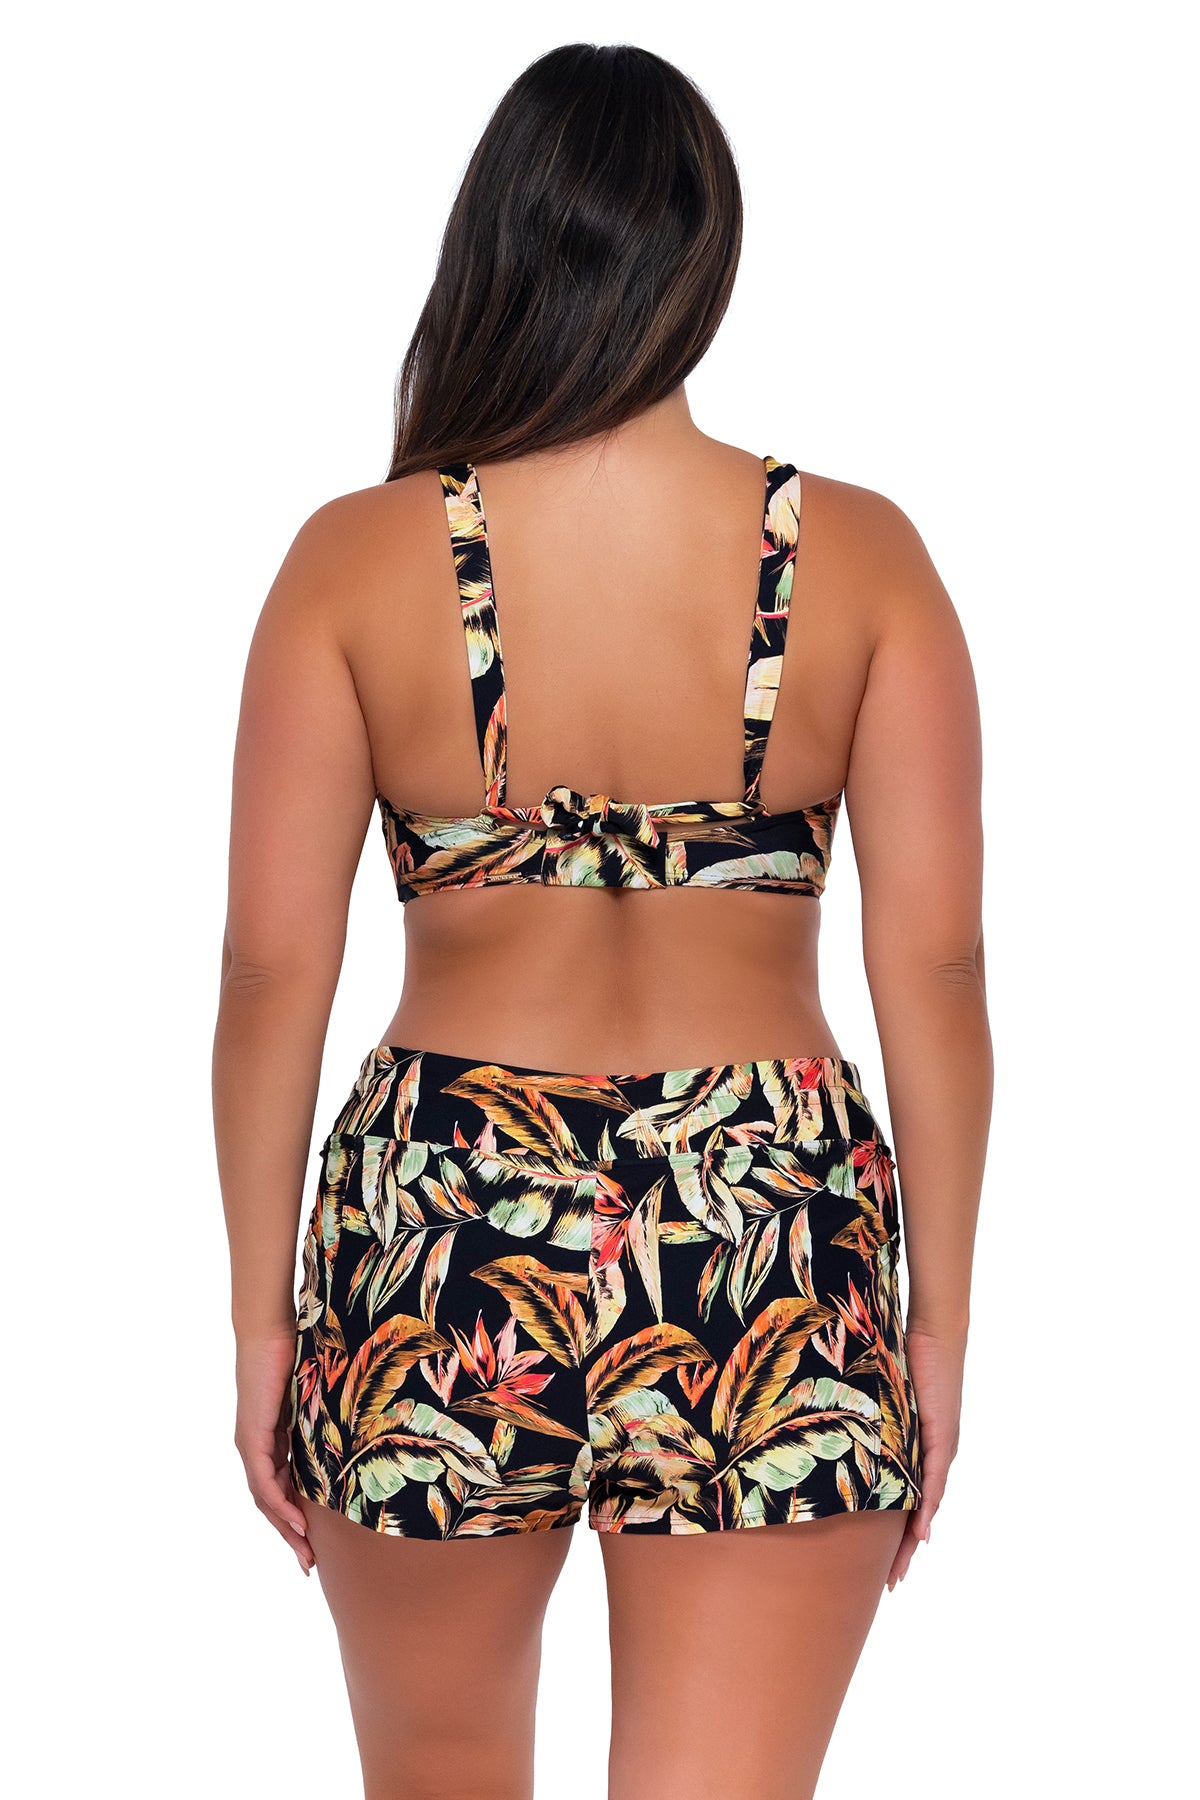 Back pose #1 of Nicky wearing Sunsets Retro Retreat Vienna V-Wire Top with matching Laguna Swim Short